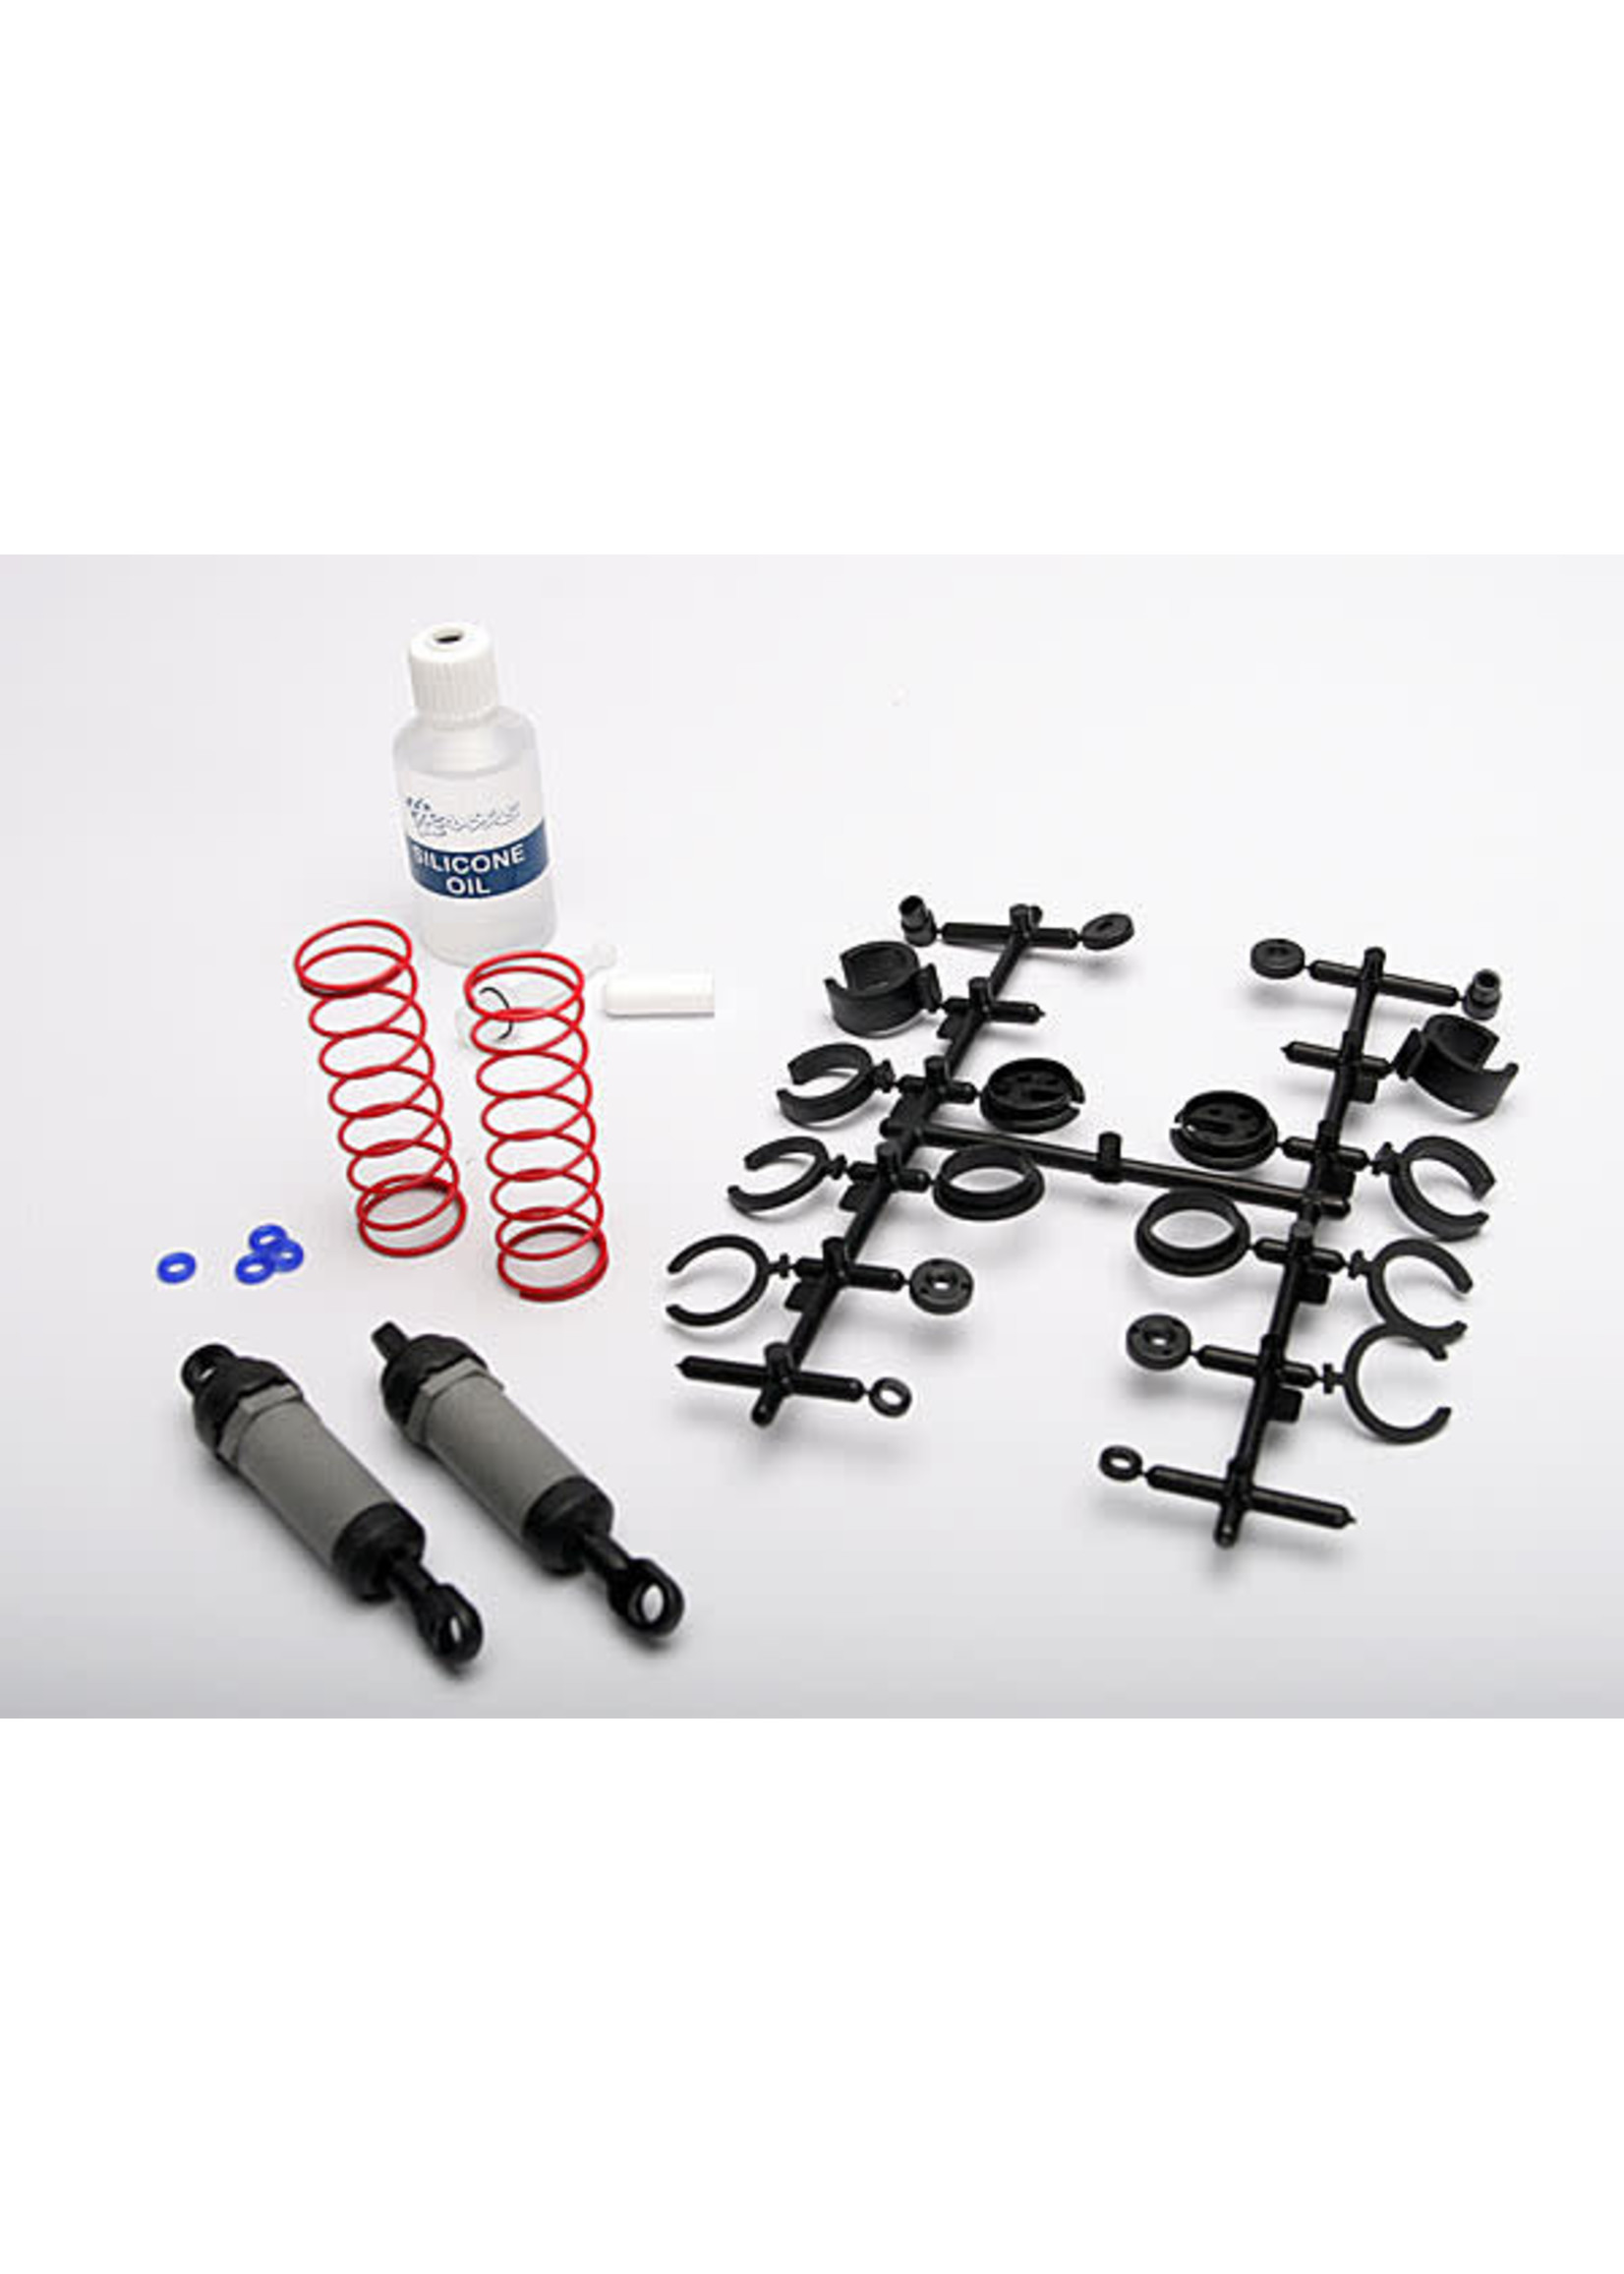 Traxxas TRA3760A Traxxas Ultra Shocks (gray) (long) (complete w/ spring pre-load spacers & springs) (2)